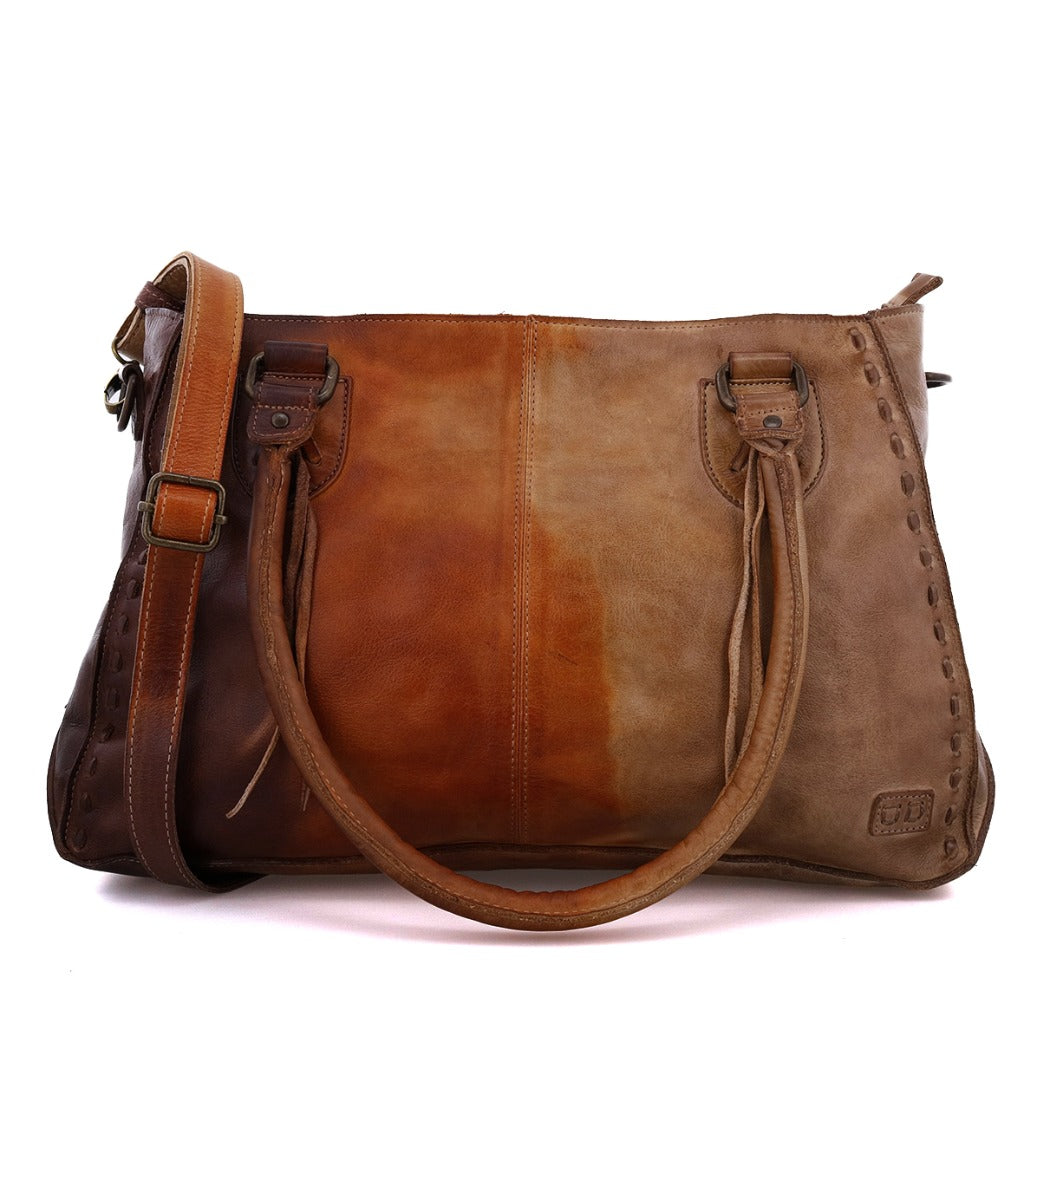 A Rockababy handbag by Bed Stu, made of pure leather.